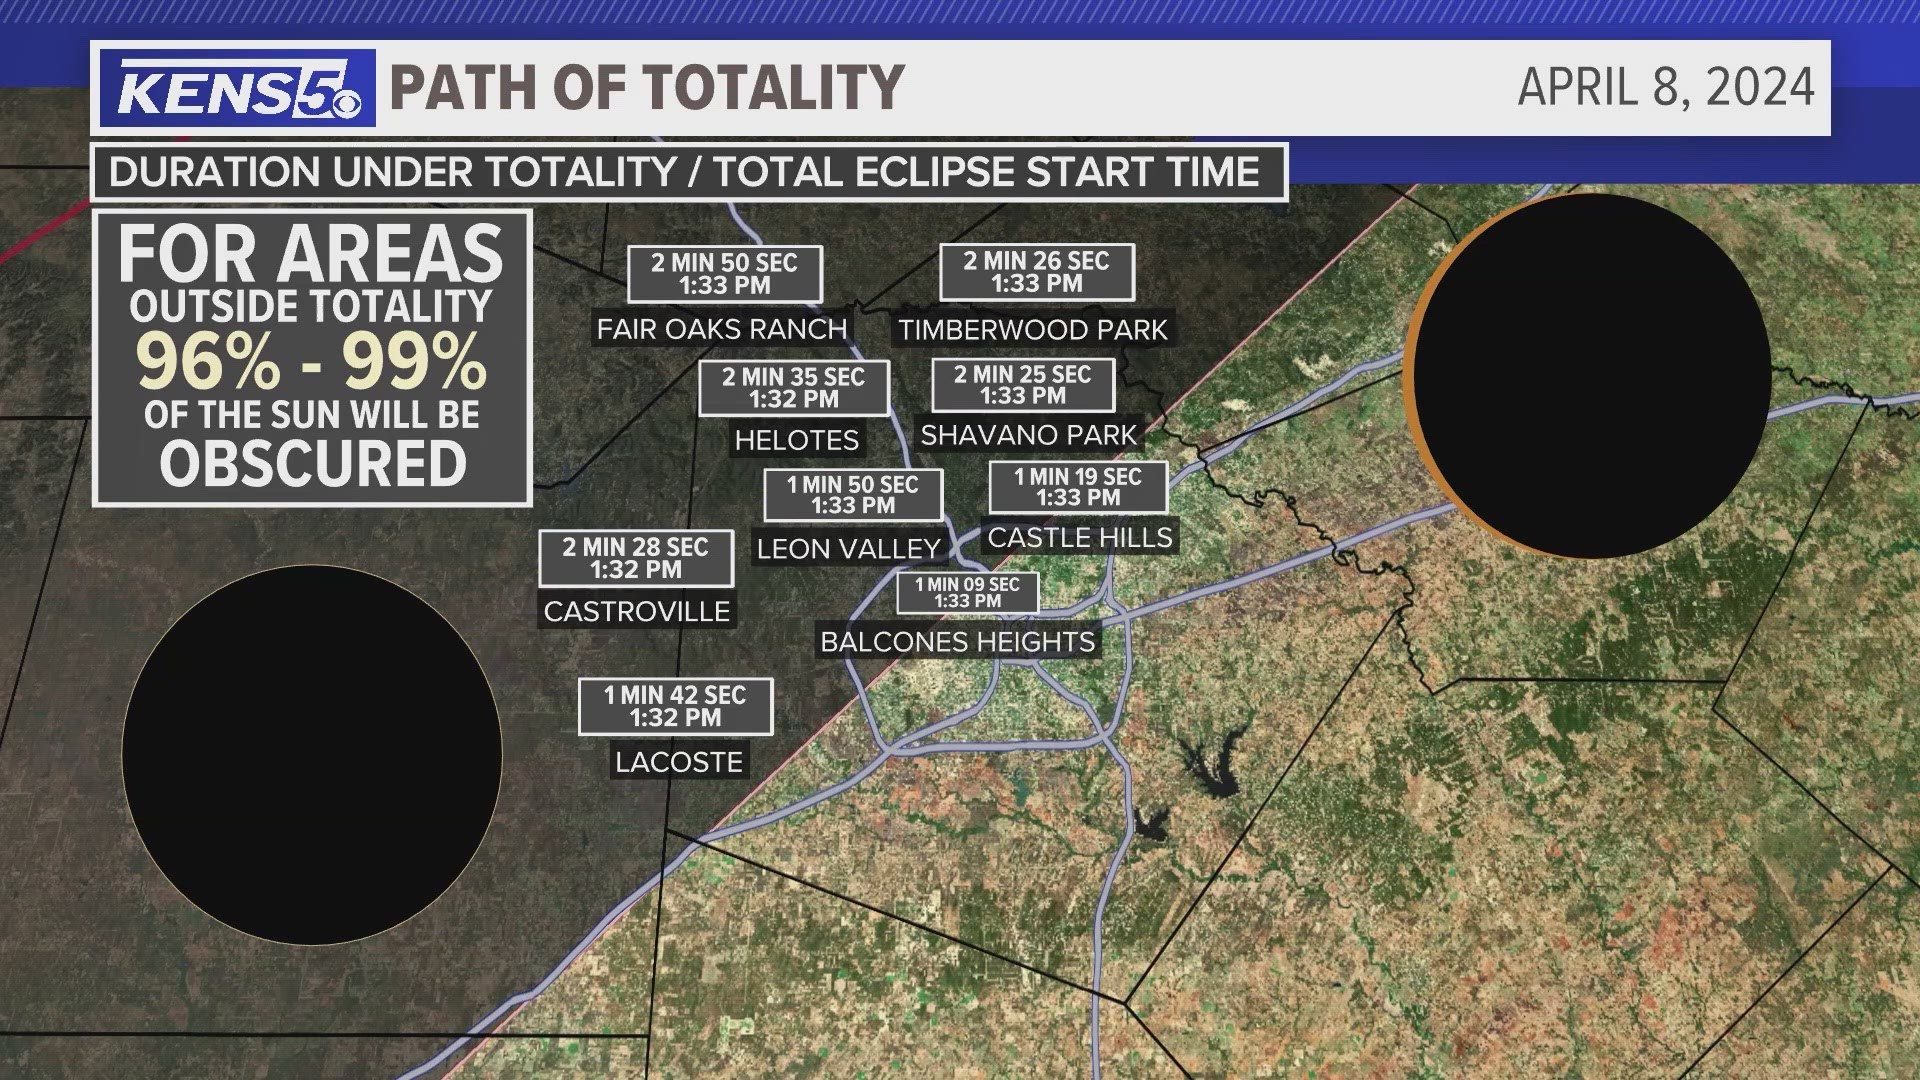 Ryan Shoptaugh gives a timeline breakdown of what different areas, in and around San Antonio, can expect for the upcoming solar eclipse.